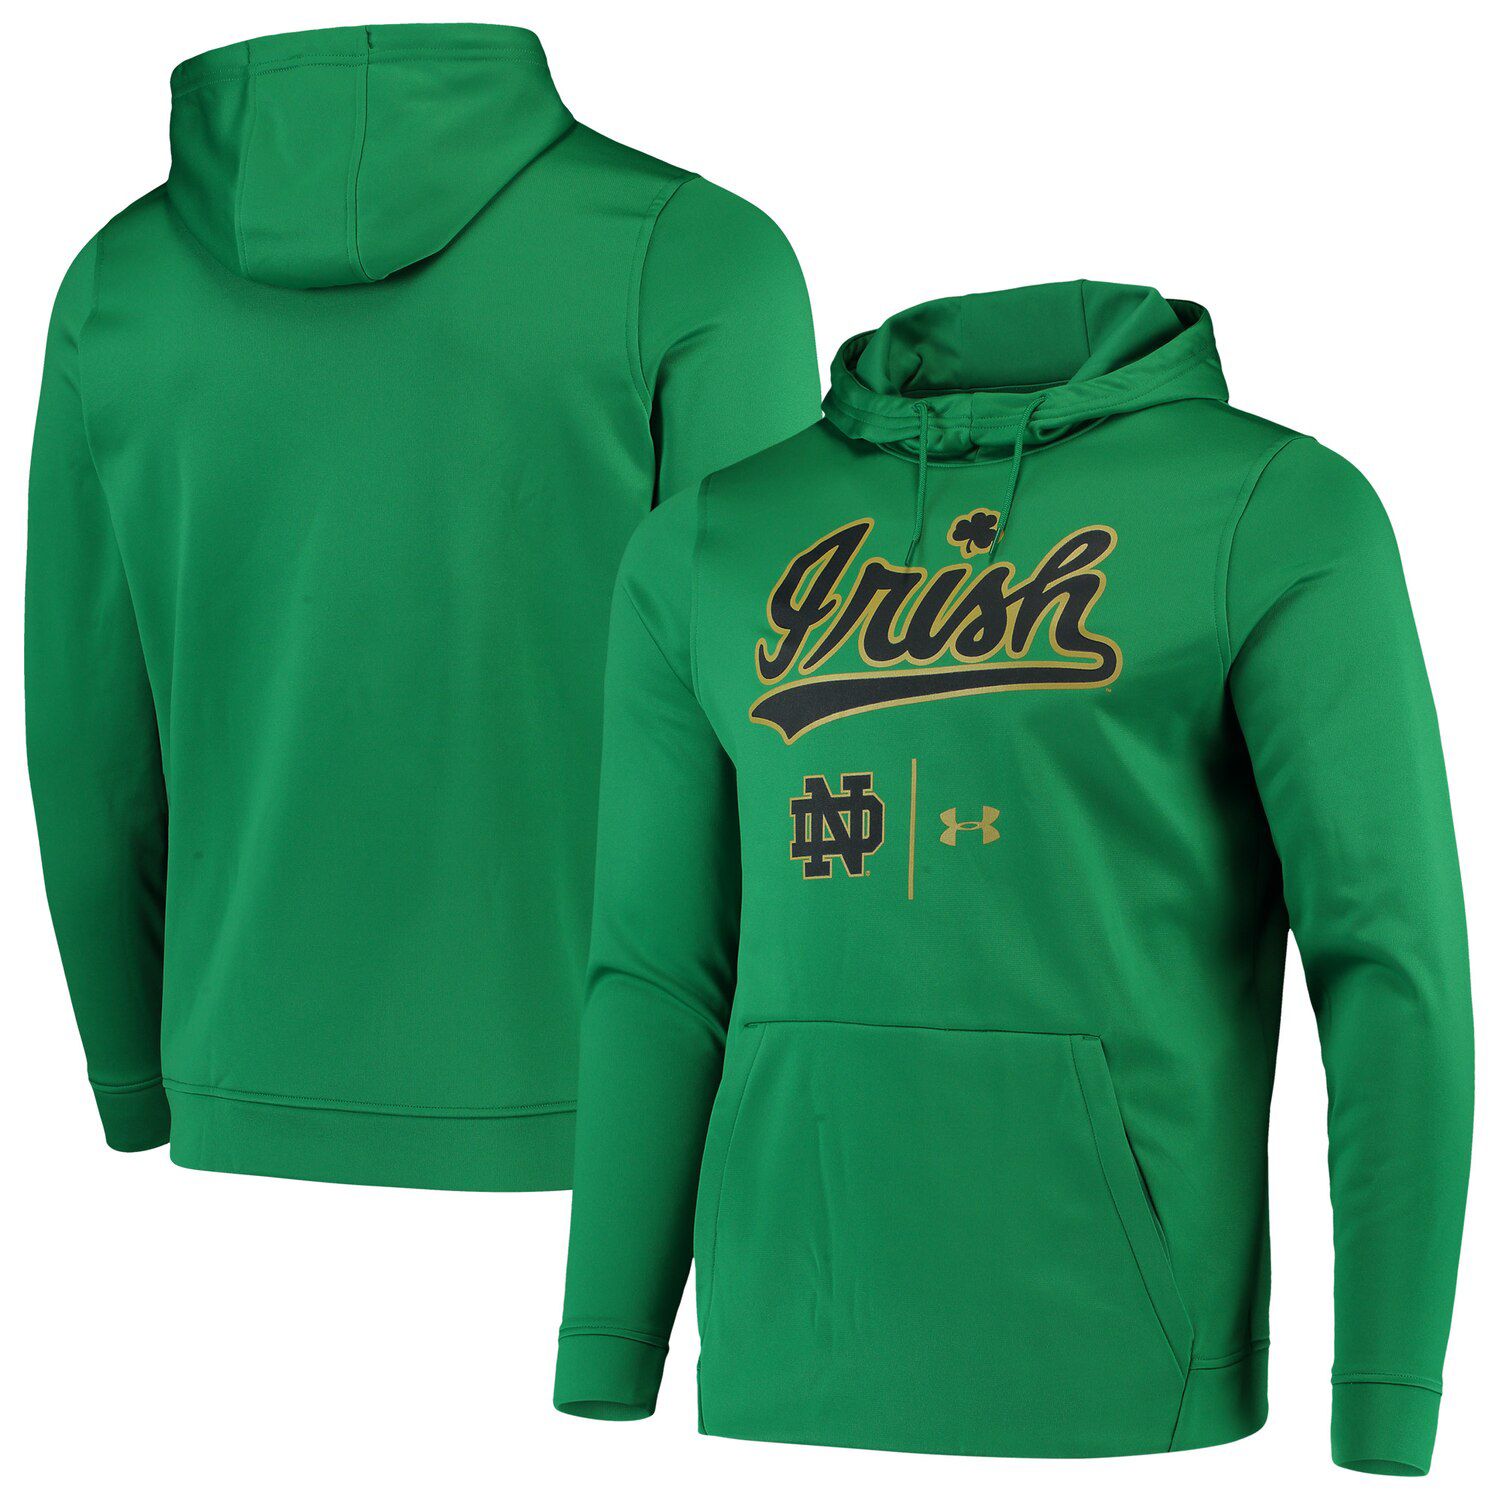 notre dame under armour hoodie